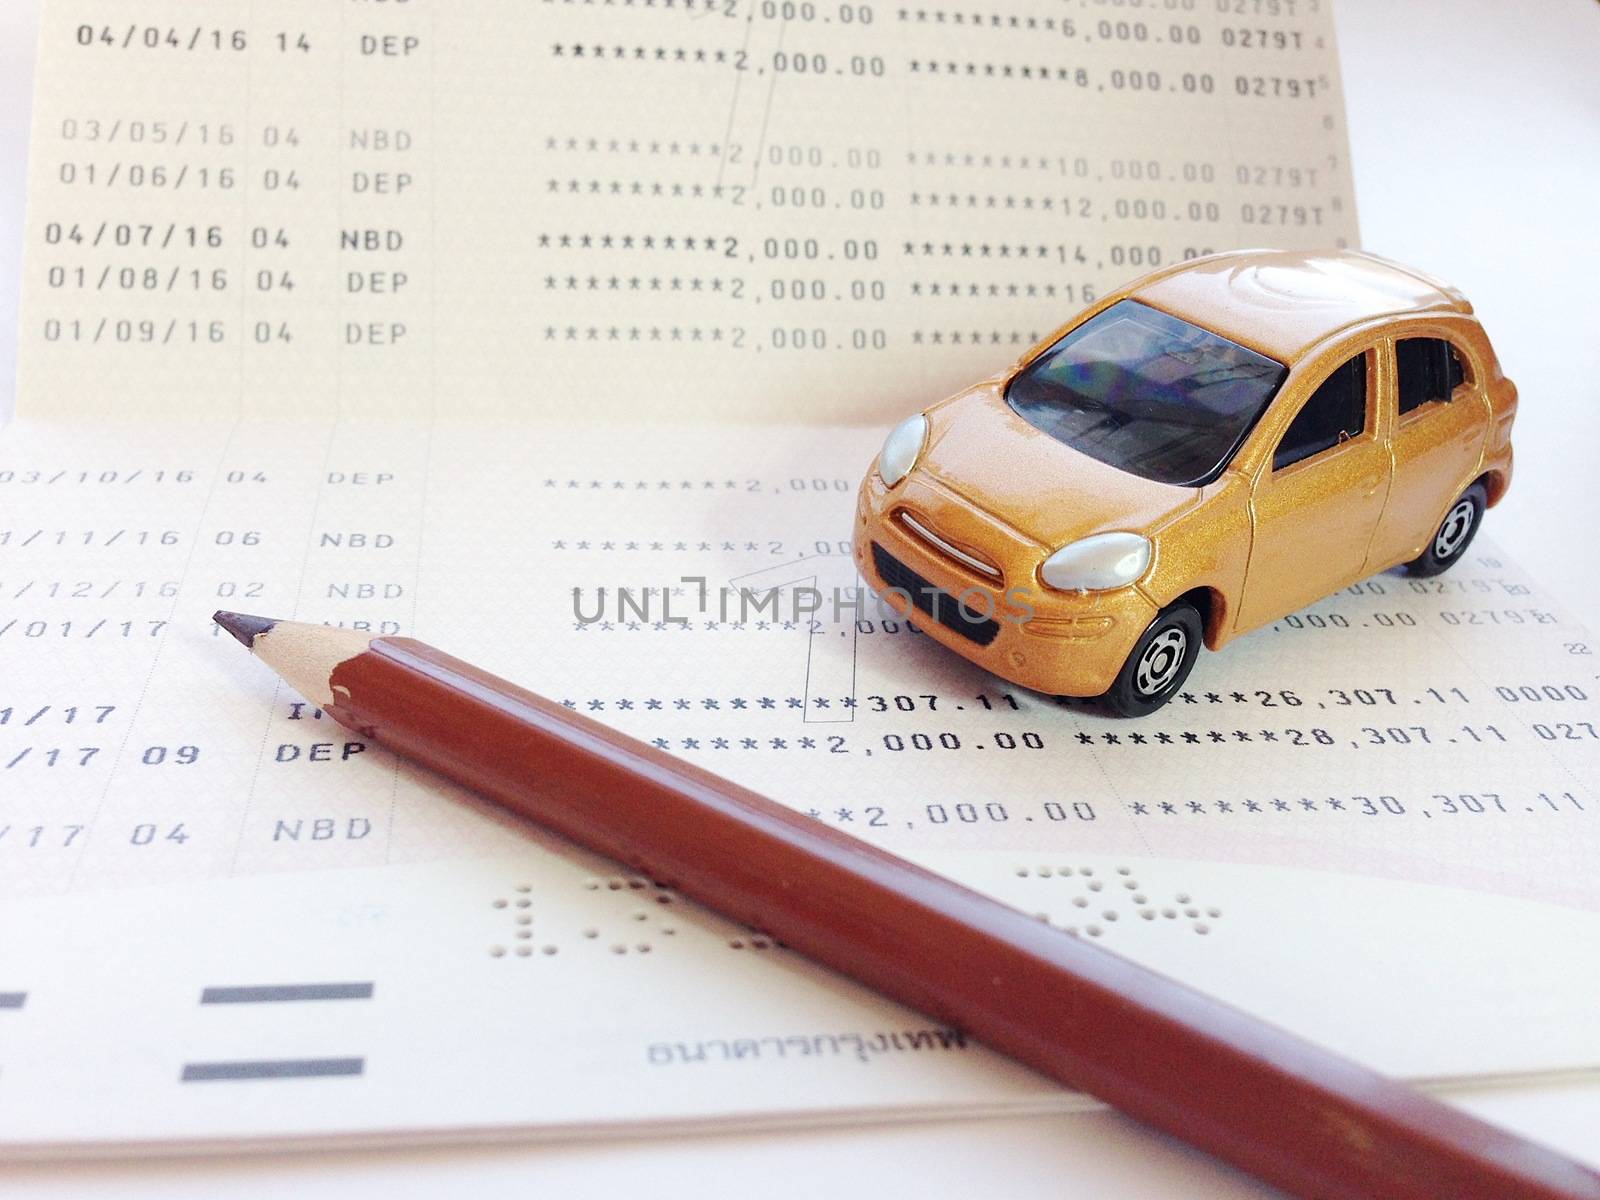 Business, finance, savings, banking or car loan concept : Miniature car model, pencil and savings account passbook or financial statement on white background